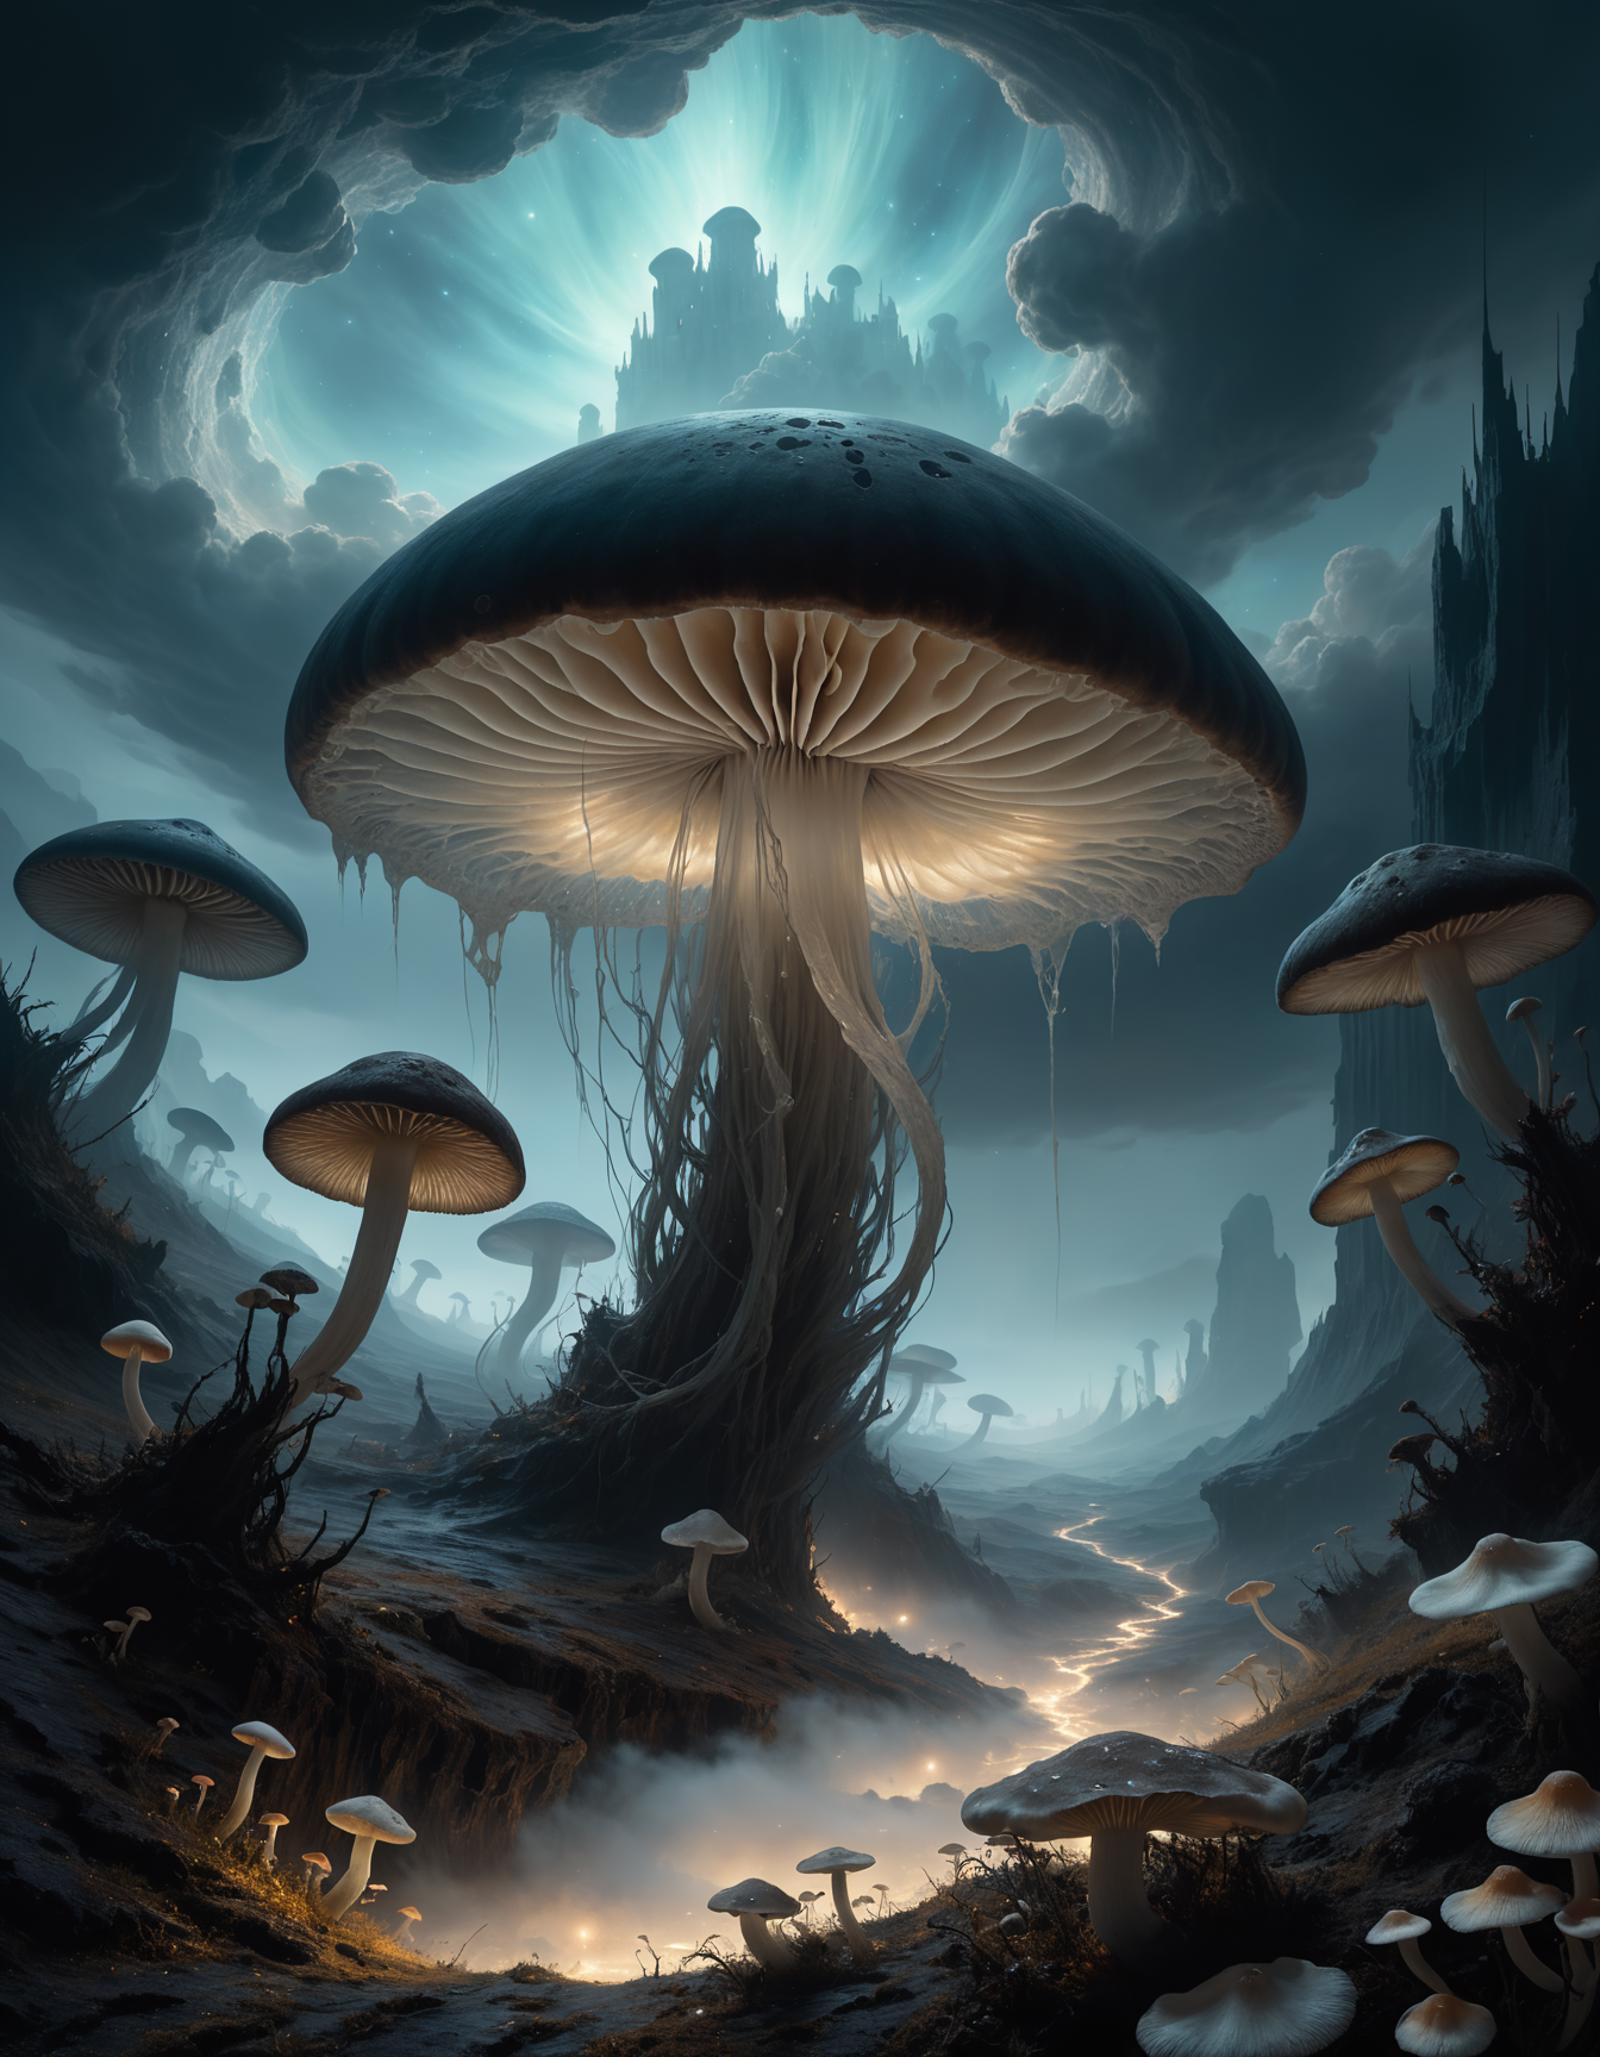 An artistic drawing of mushrooms and a castle under a cloudy sky.